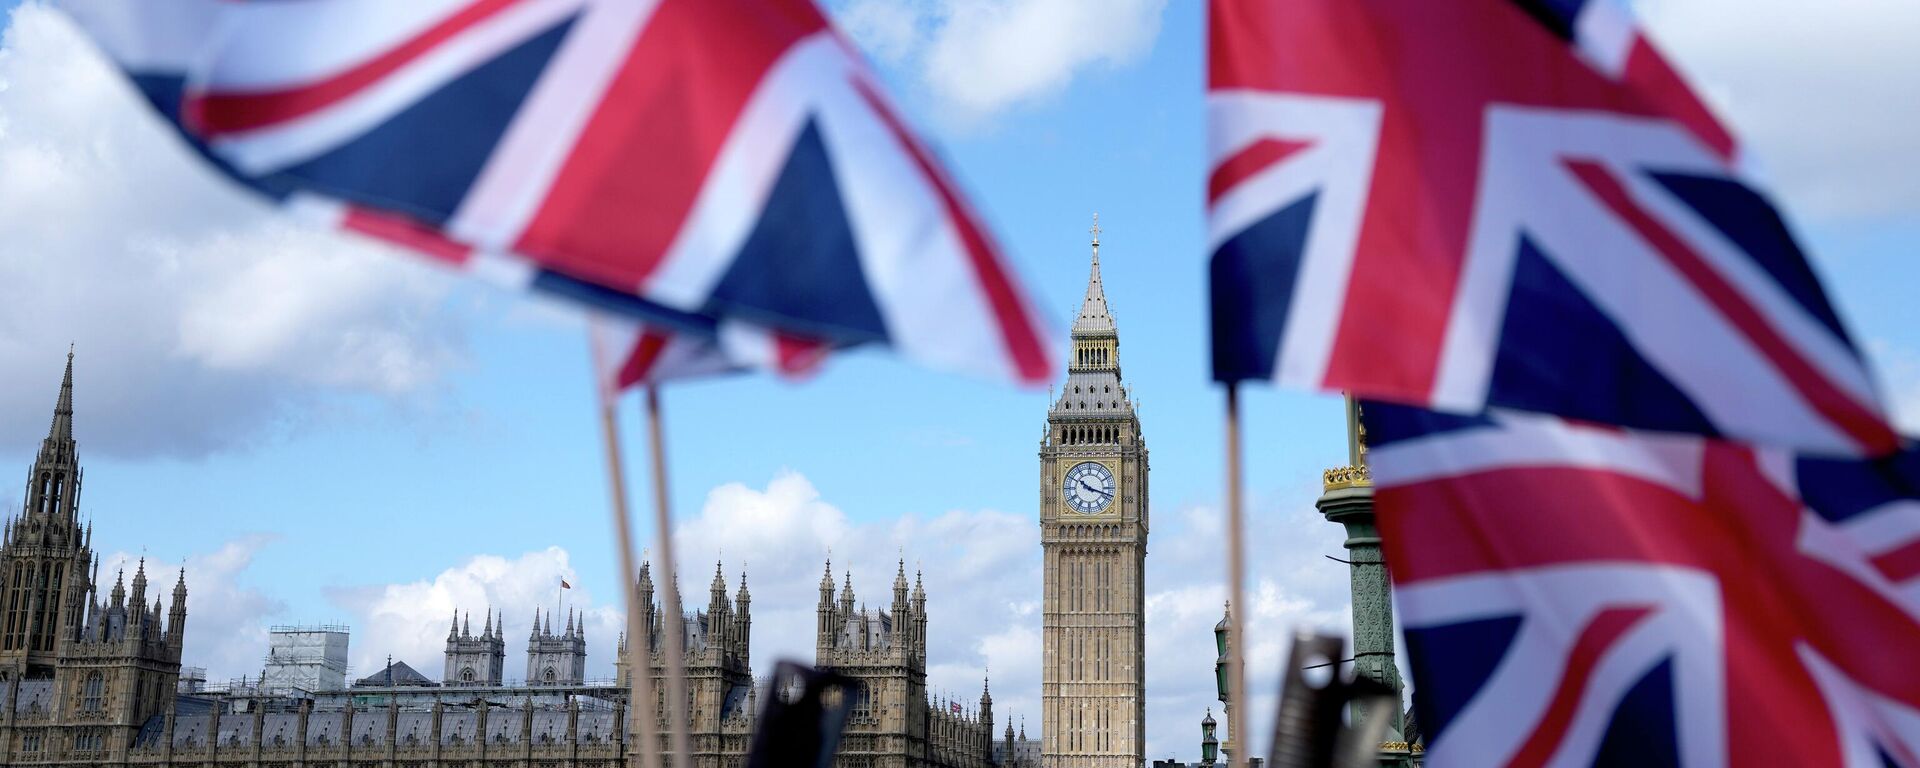 Union Jack flags are seen surrounding the Elizabeth Tower, known as Big Ben, beside the Houses of Parliament in London, Friday, June 24, 2022. - Sputnik International, 1920, 01.07.2022